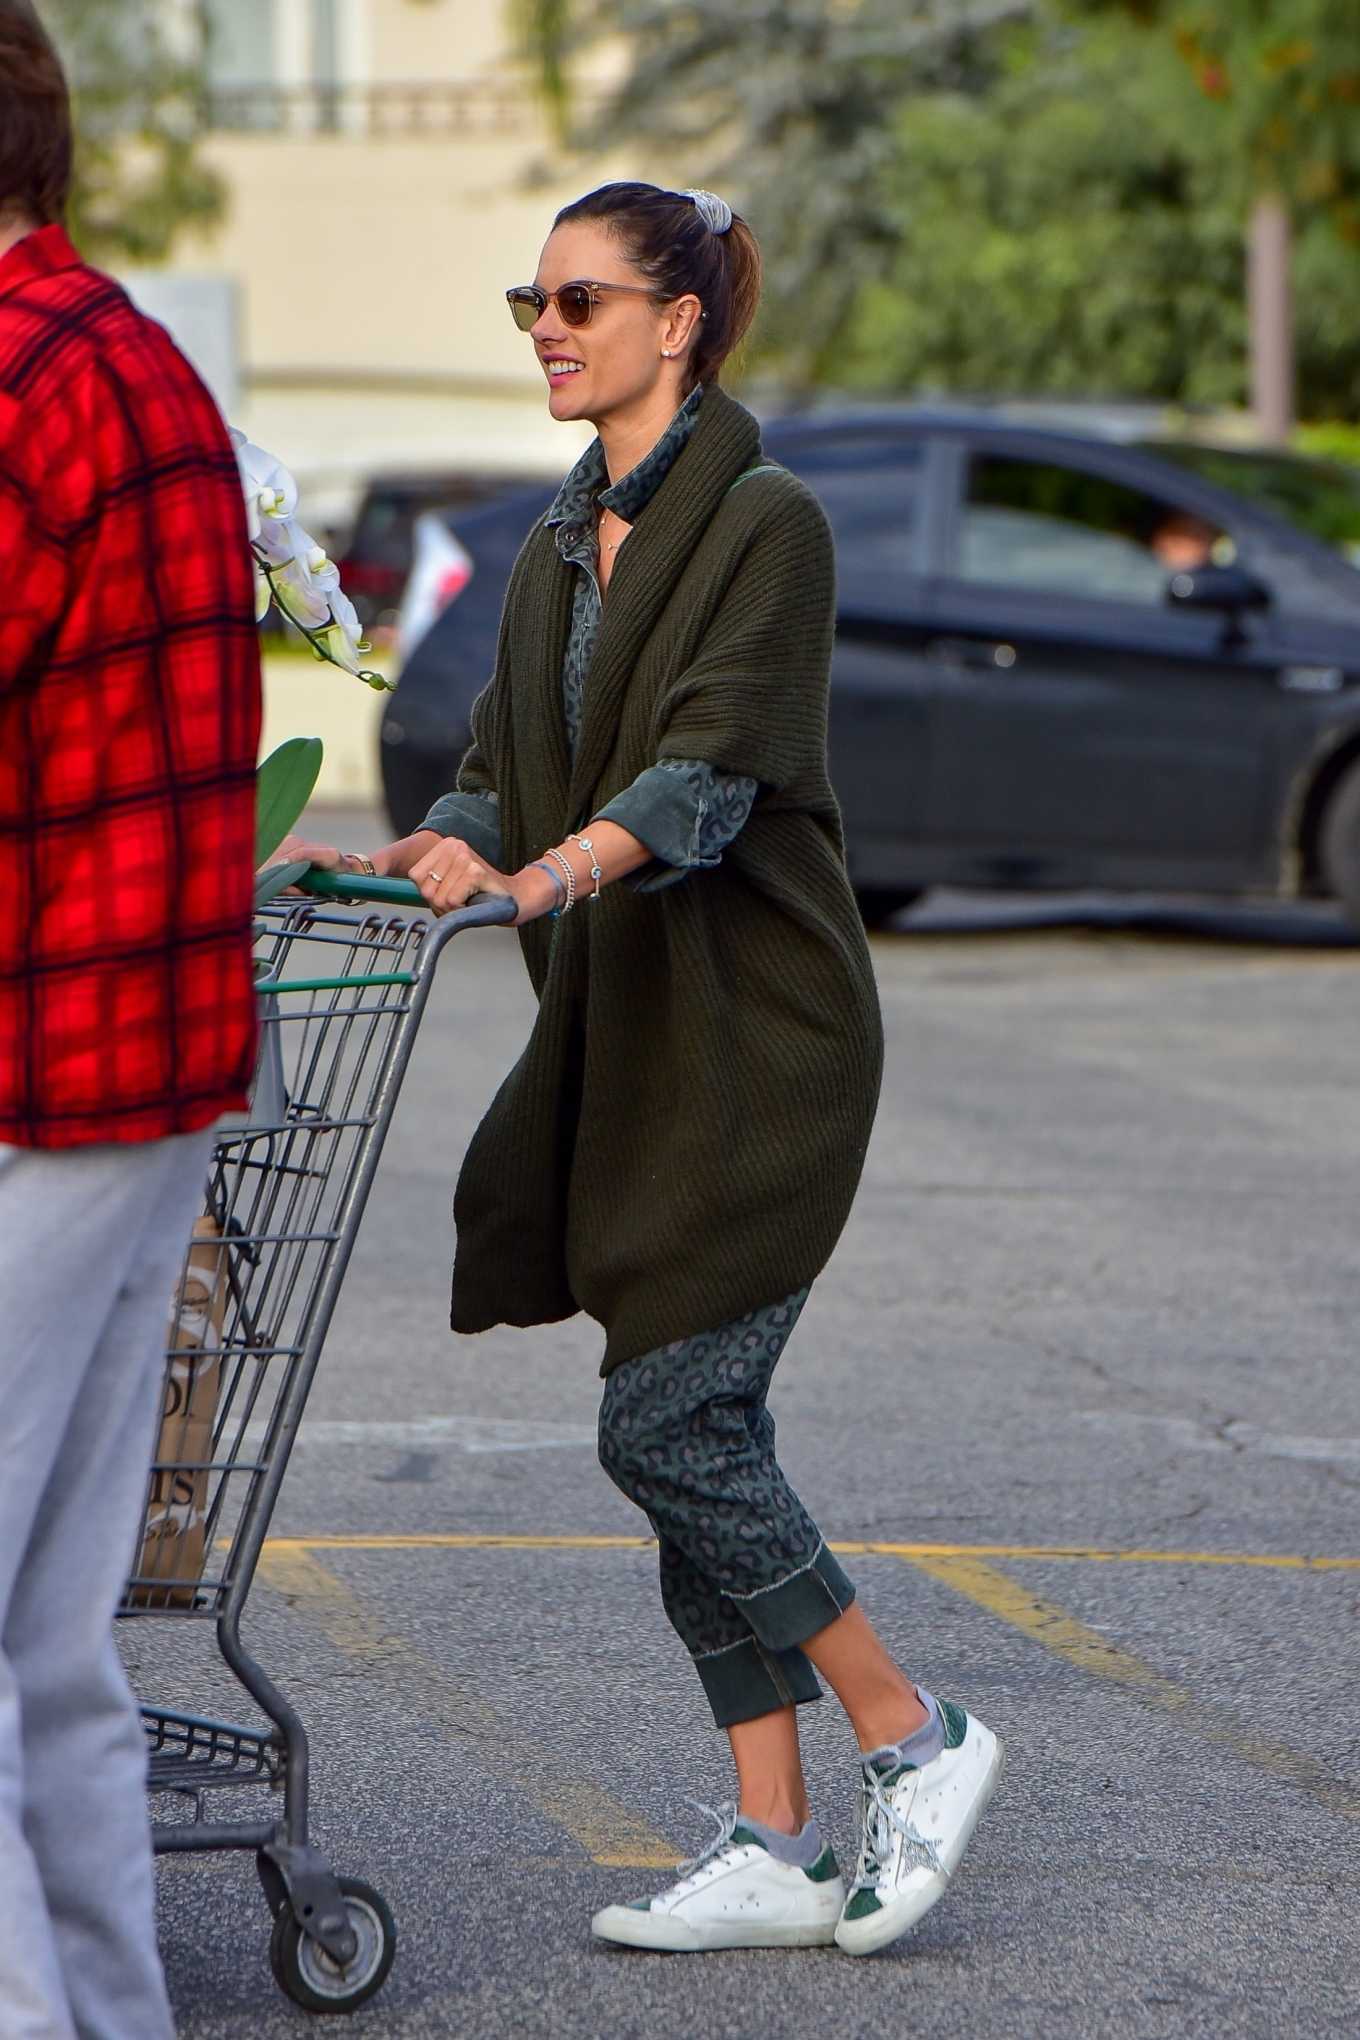 Alessandra Ambrosio â€“ Grocery shopping during â€˜Stay at homeâ€™ order in Santa Monica